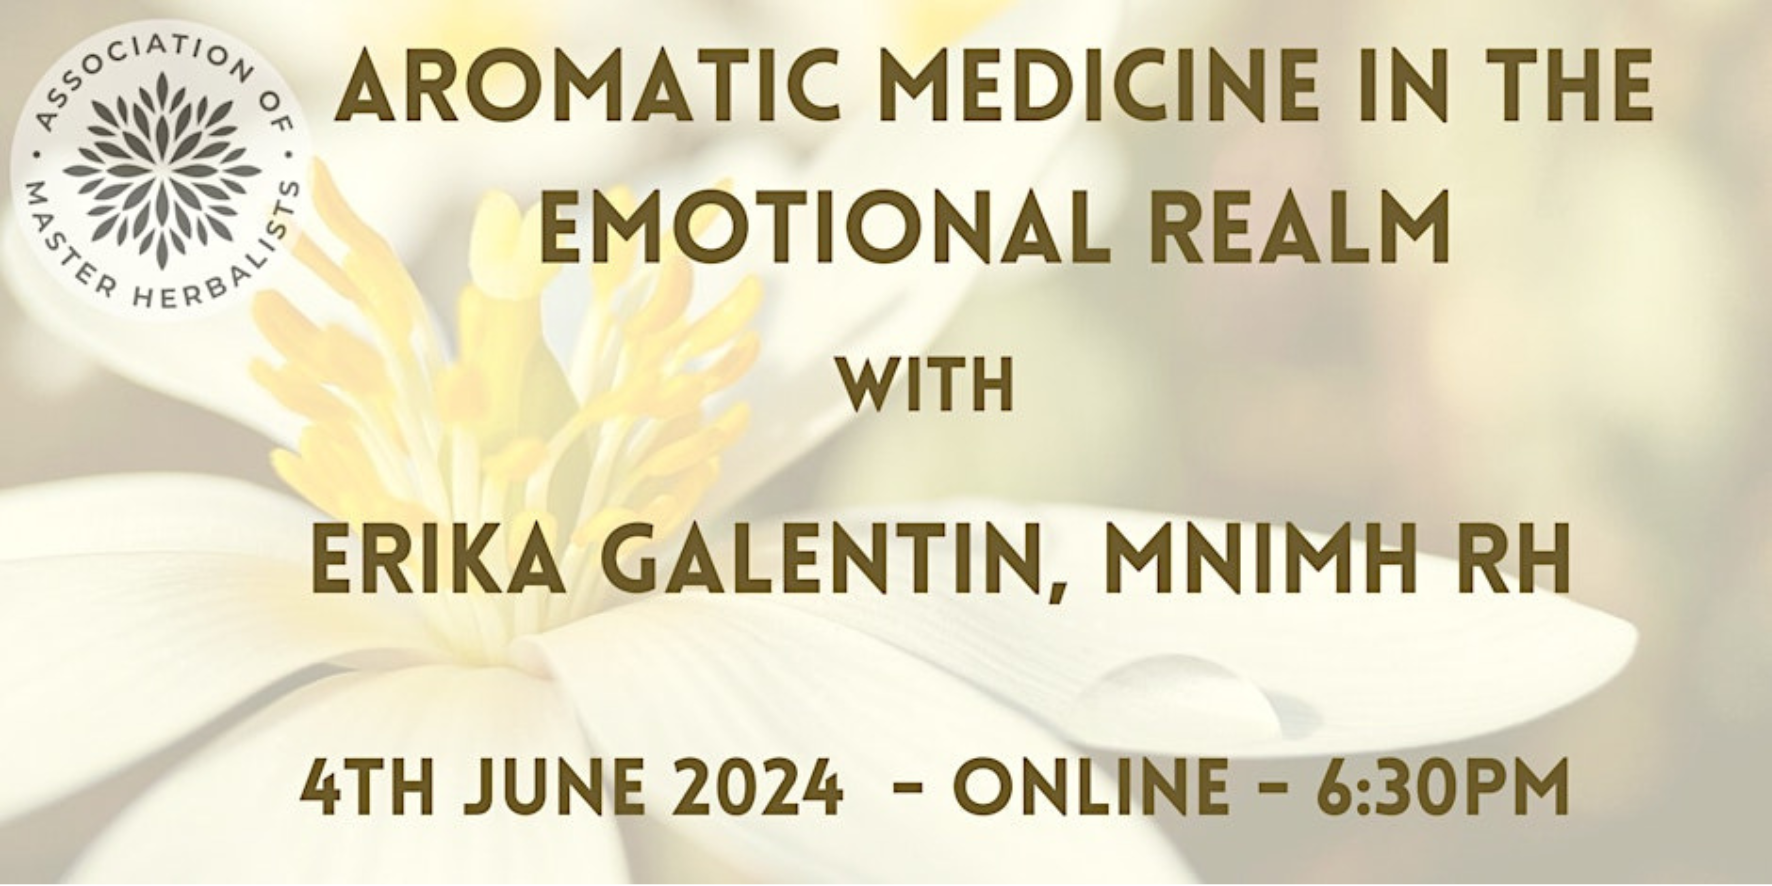 Aromatic Medicine in the Emotional Realm with Erika Galentin